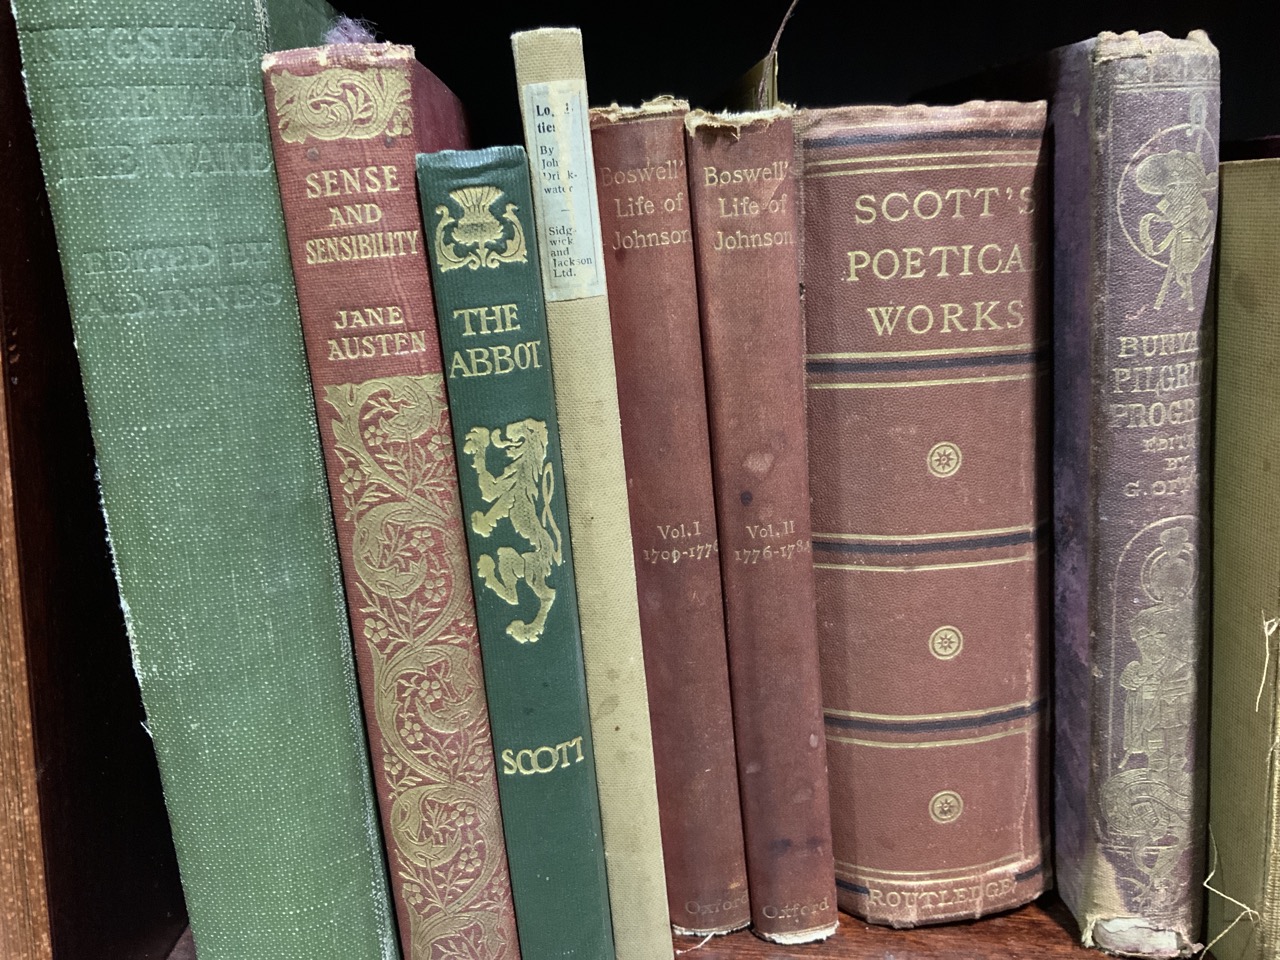 A quantity of antique books some with leather bindings - includes Jane Austen, Thackeray, Sir Walter